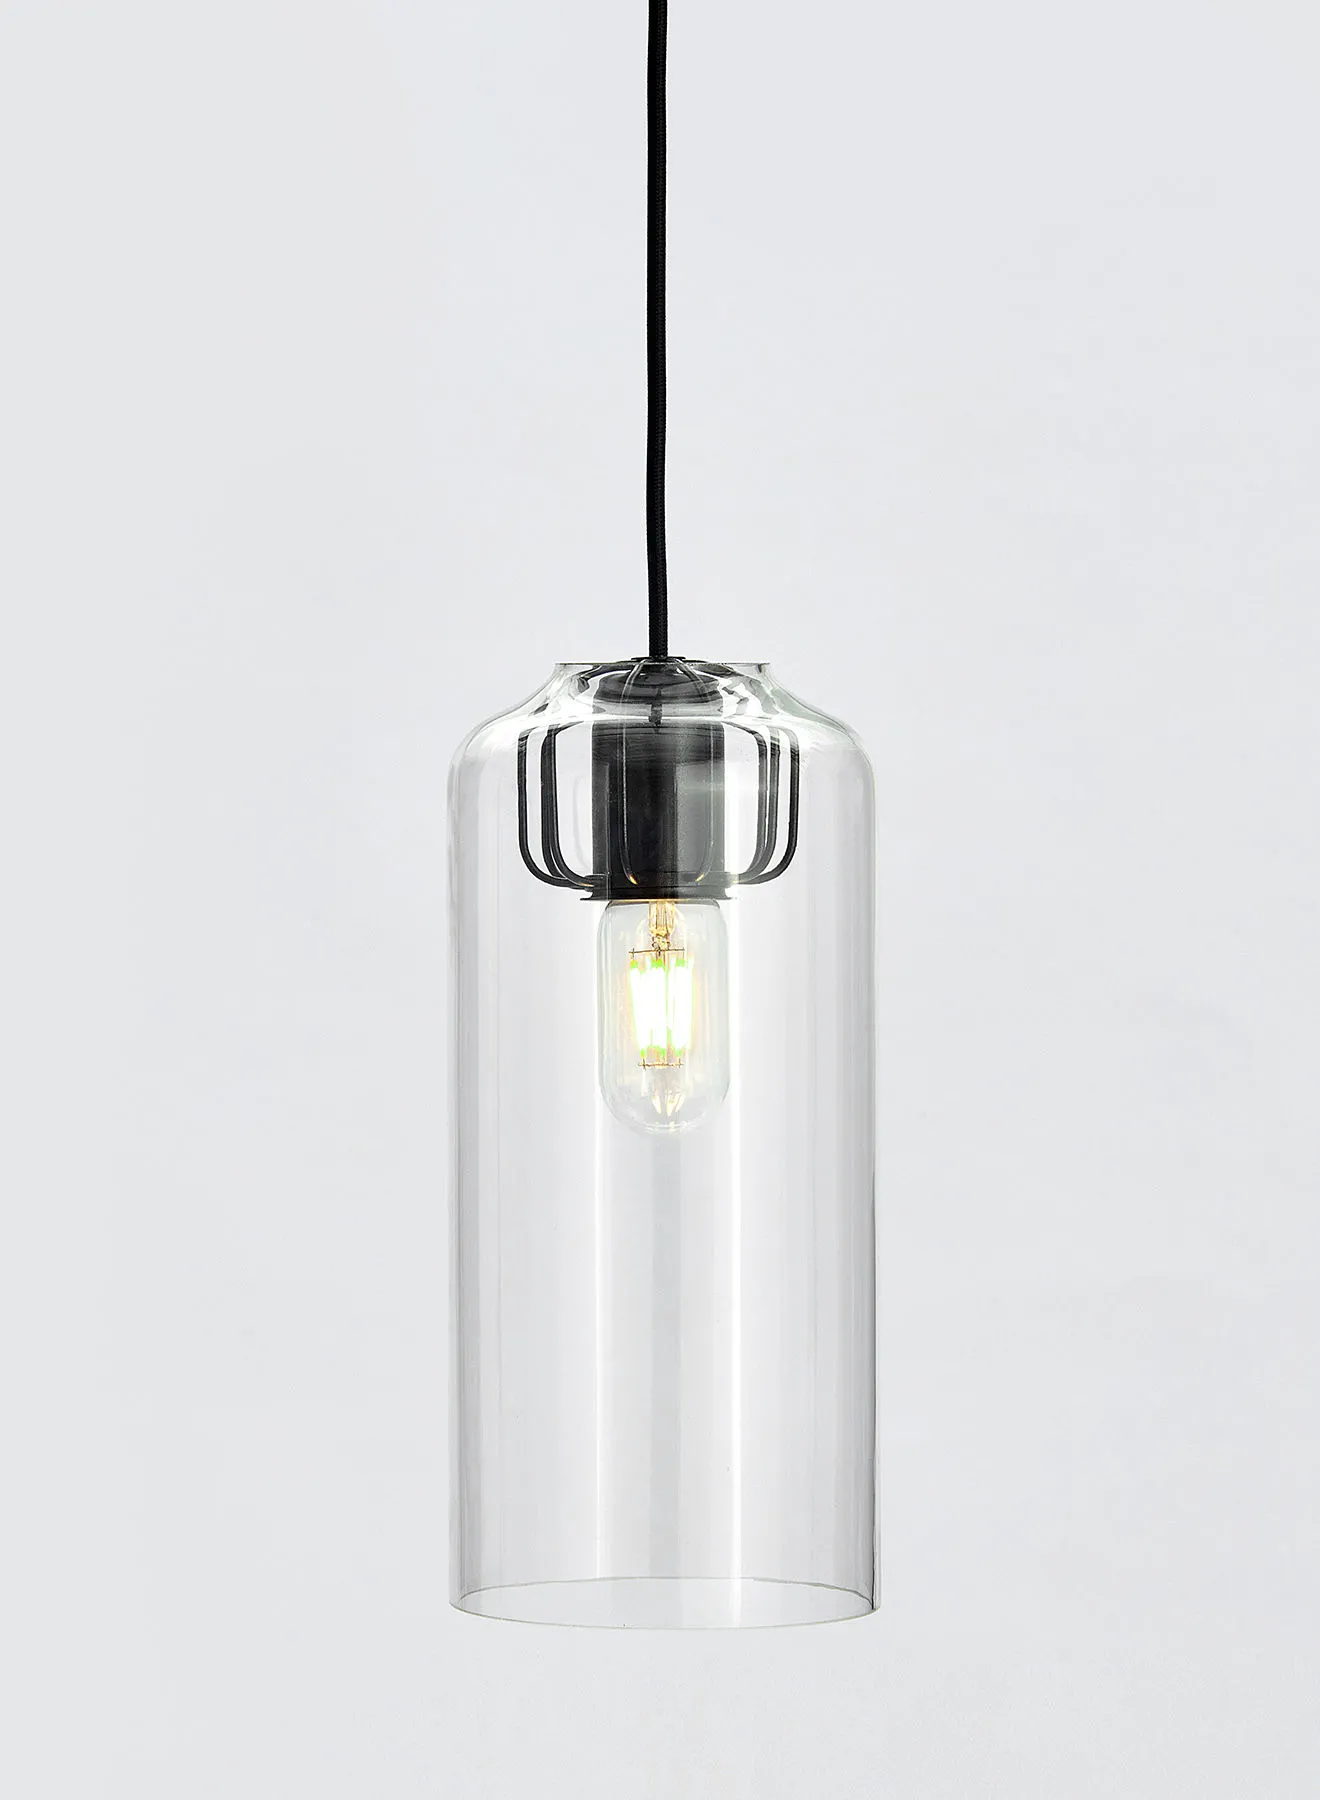 Switch Decorative Pendant Lamp Unique Luxury Quality Material for the Perfect Stylish Home PL020540 Clear/Black